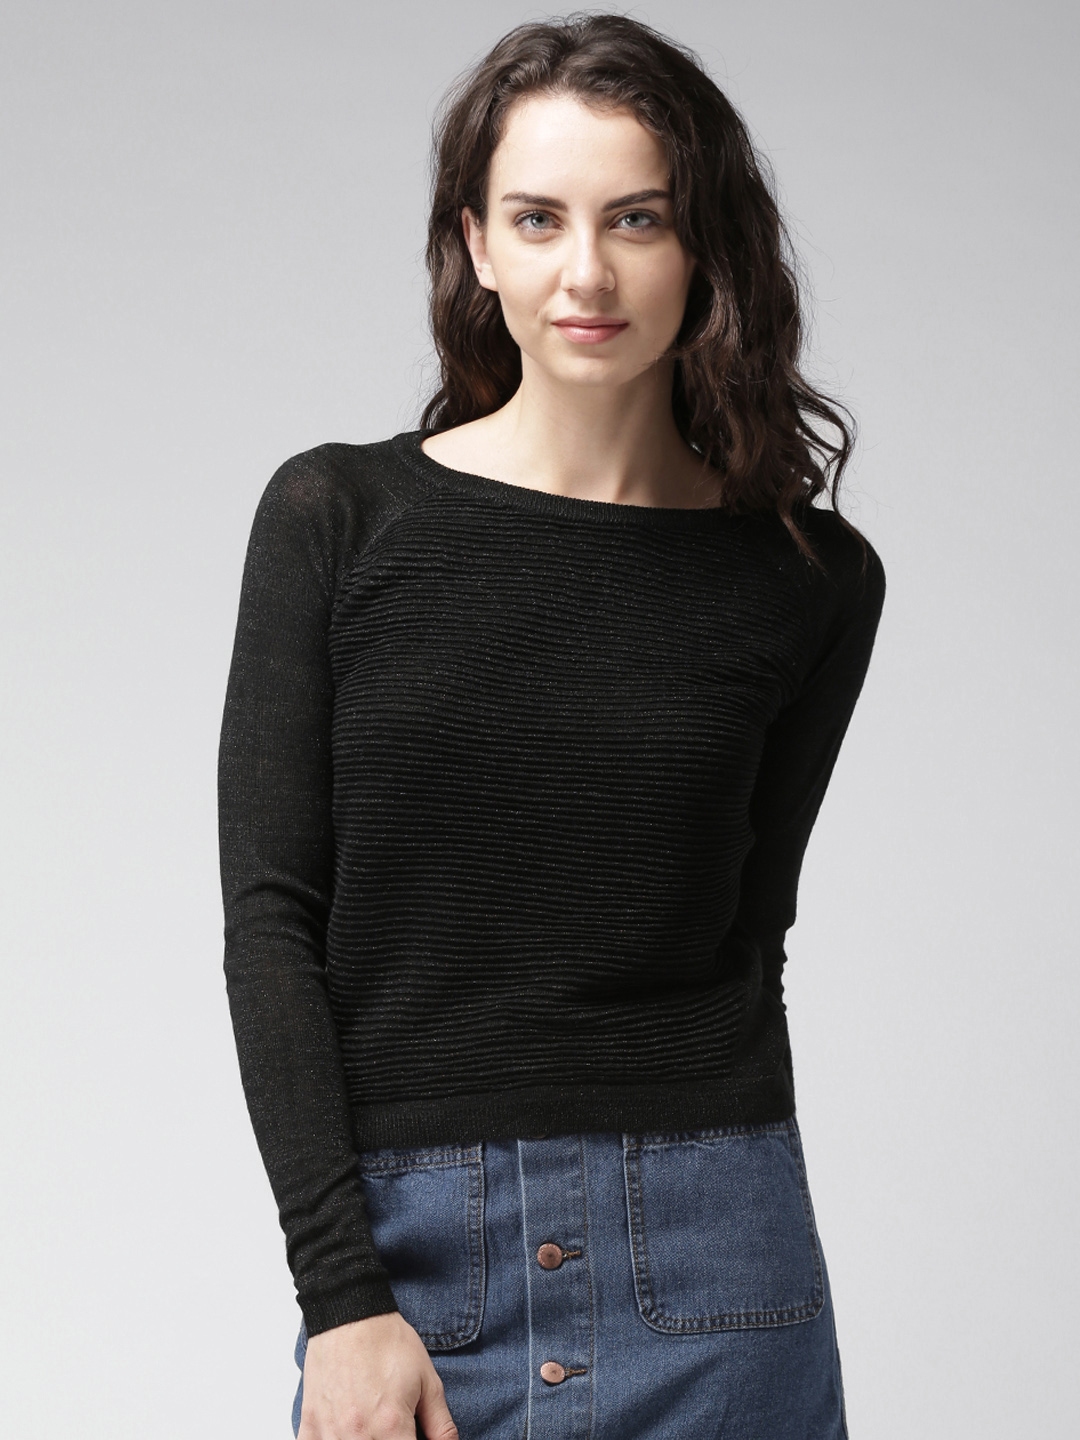 Buy Mast & Harbour Black Sweater - Sweaters for Women 809806 | Myntra